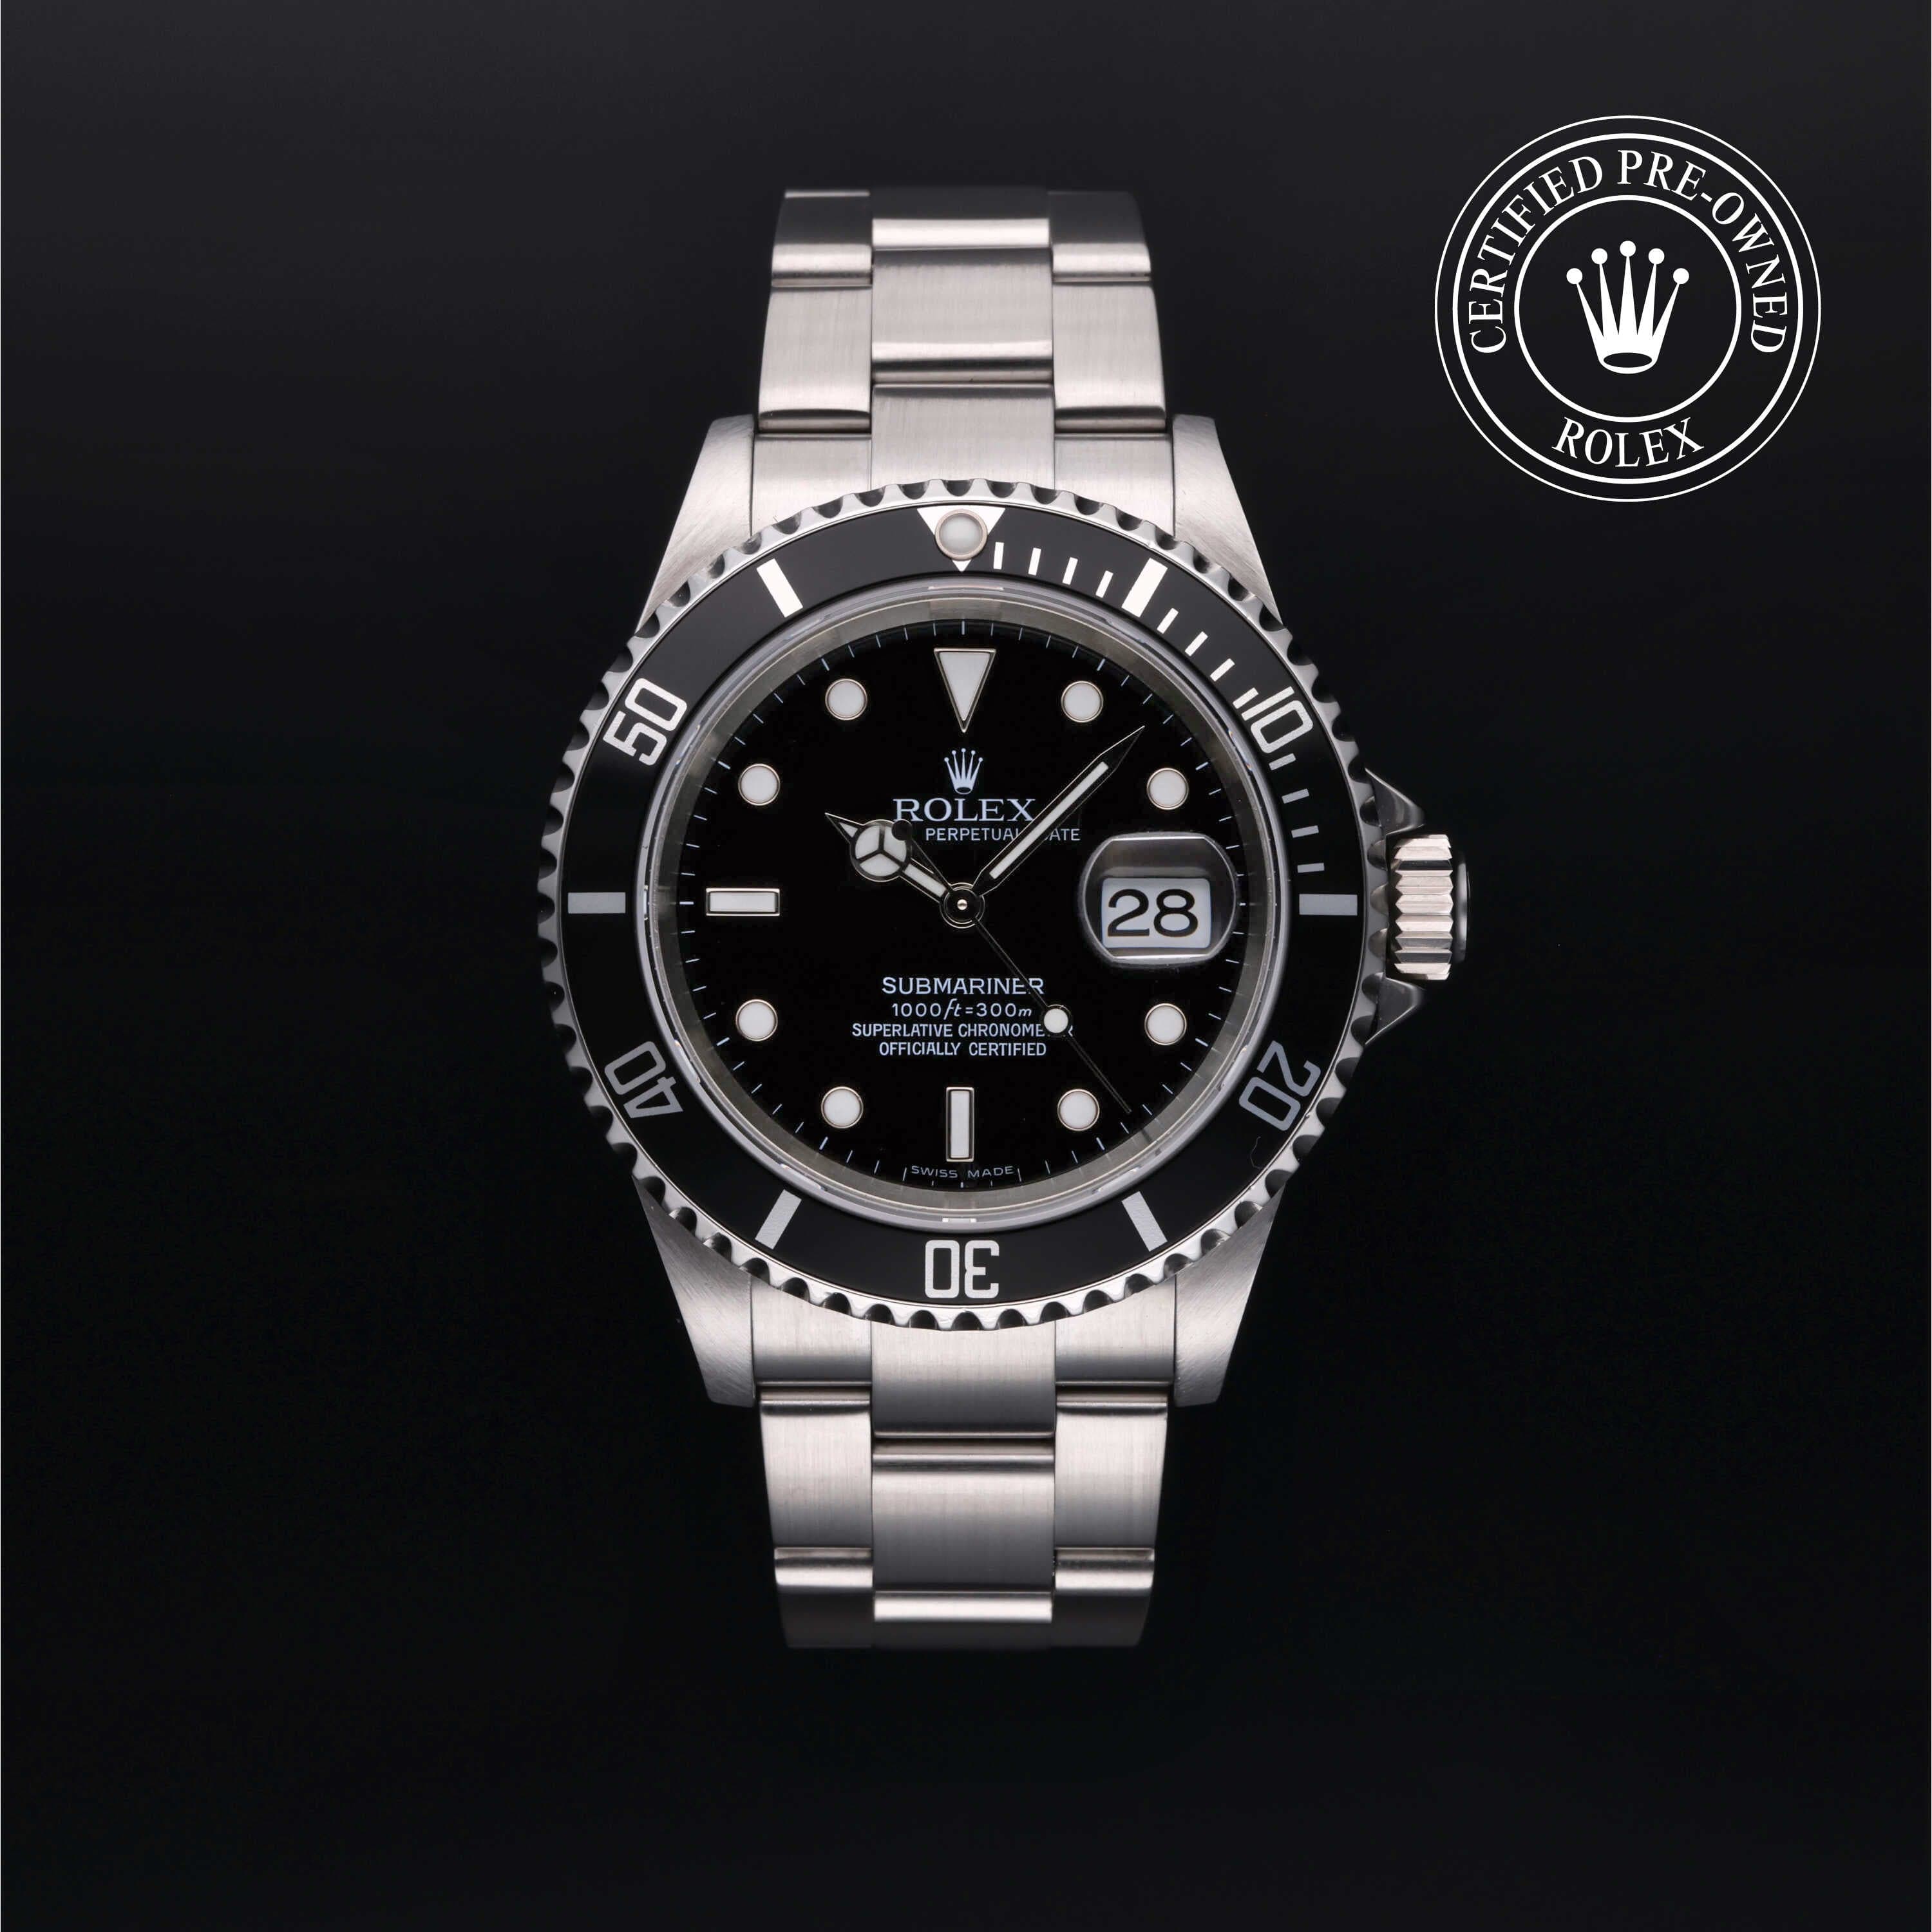 Rolex Certified Pre-Owned Submariner in Oyster, 40 mm, Stainless Steel 16610 watch available at Long's Jewelers.